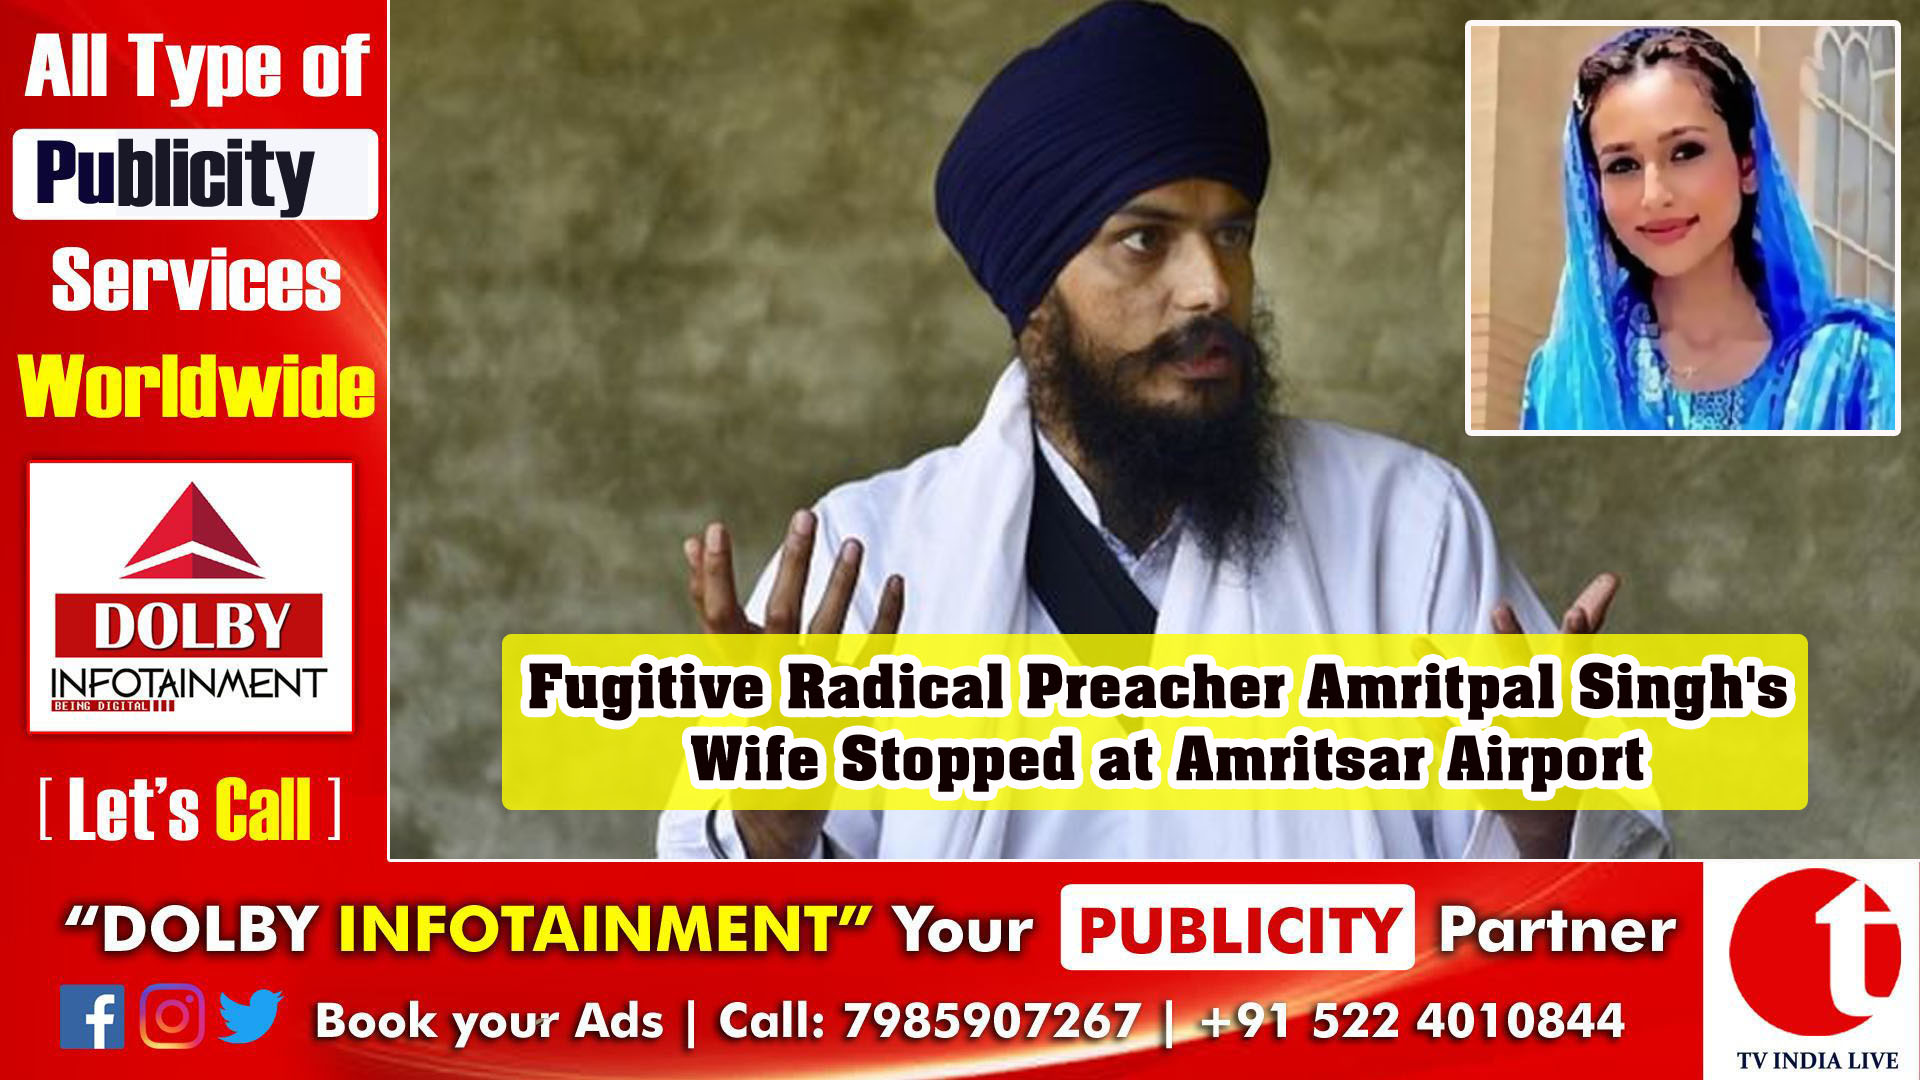 Fugitive Radical Preacher Amritpal Singh's Wife Stopped at Amritsar Airport